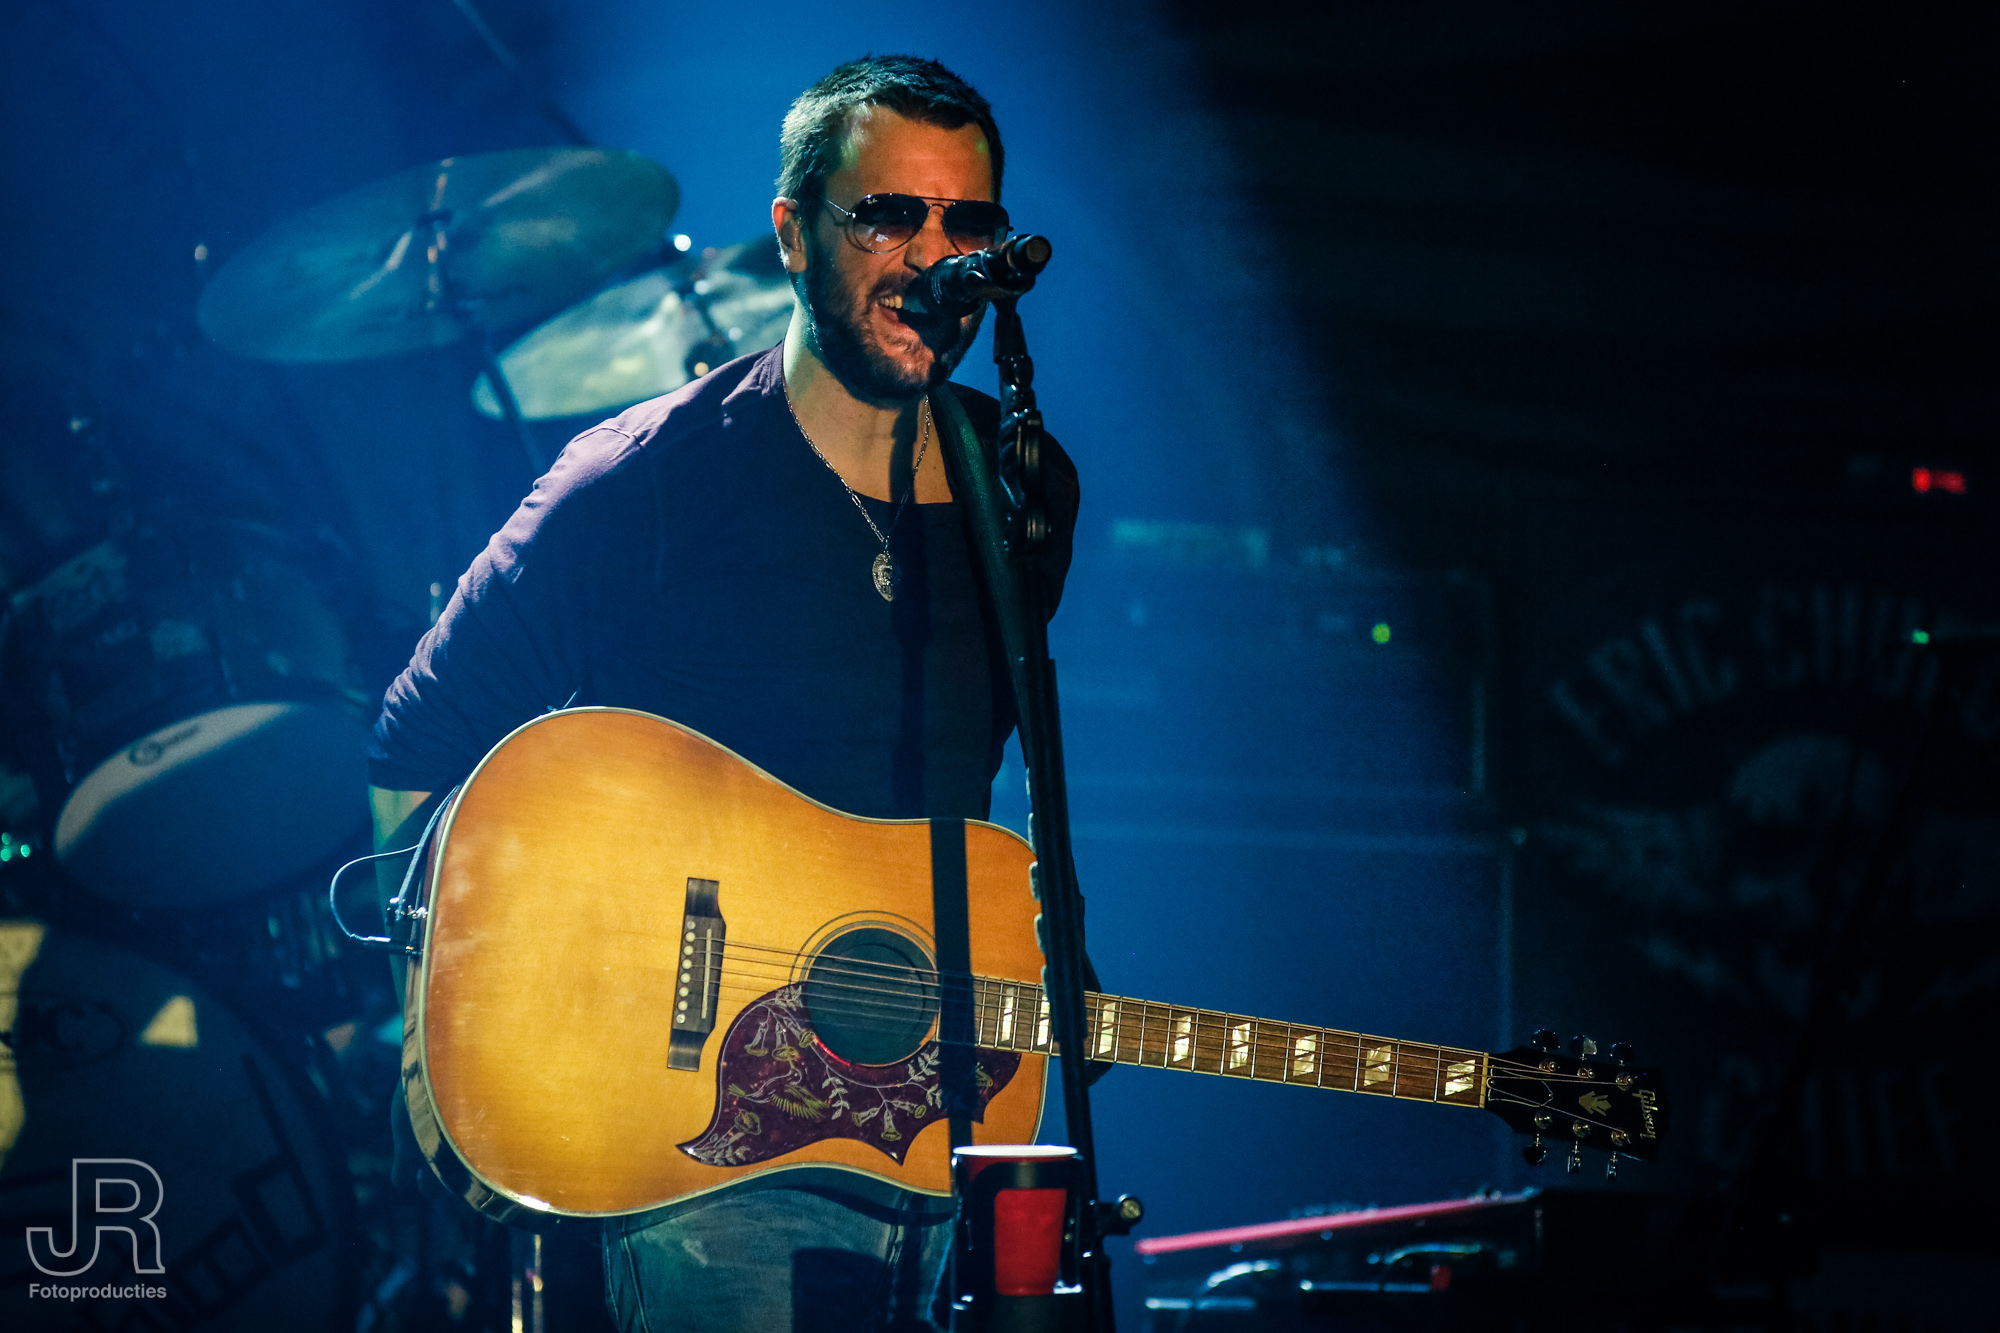 Eric Church met nieuwe song “Hell of a View”